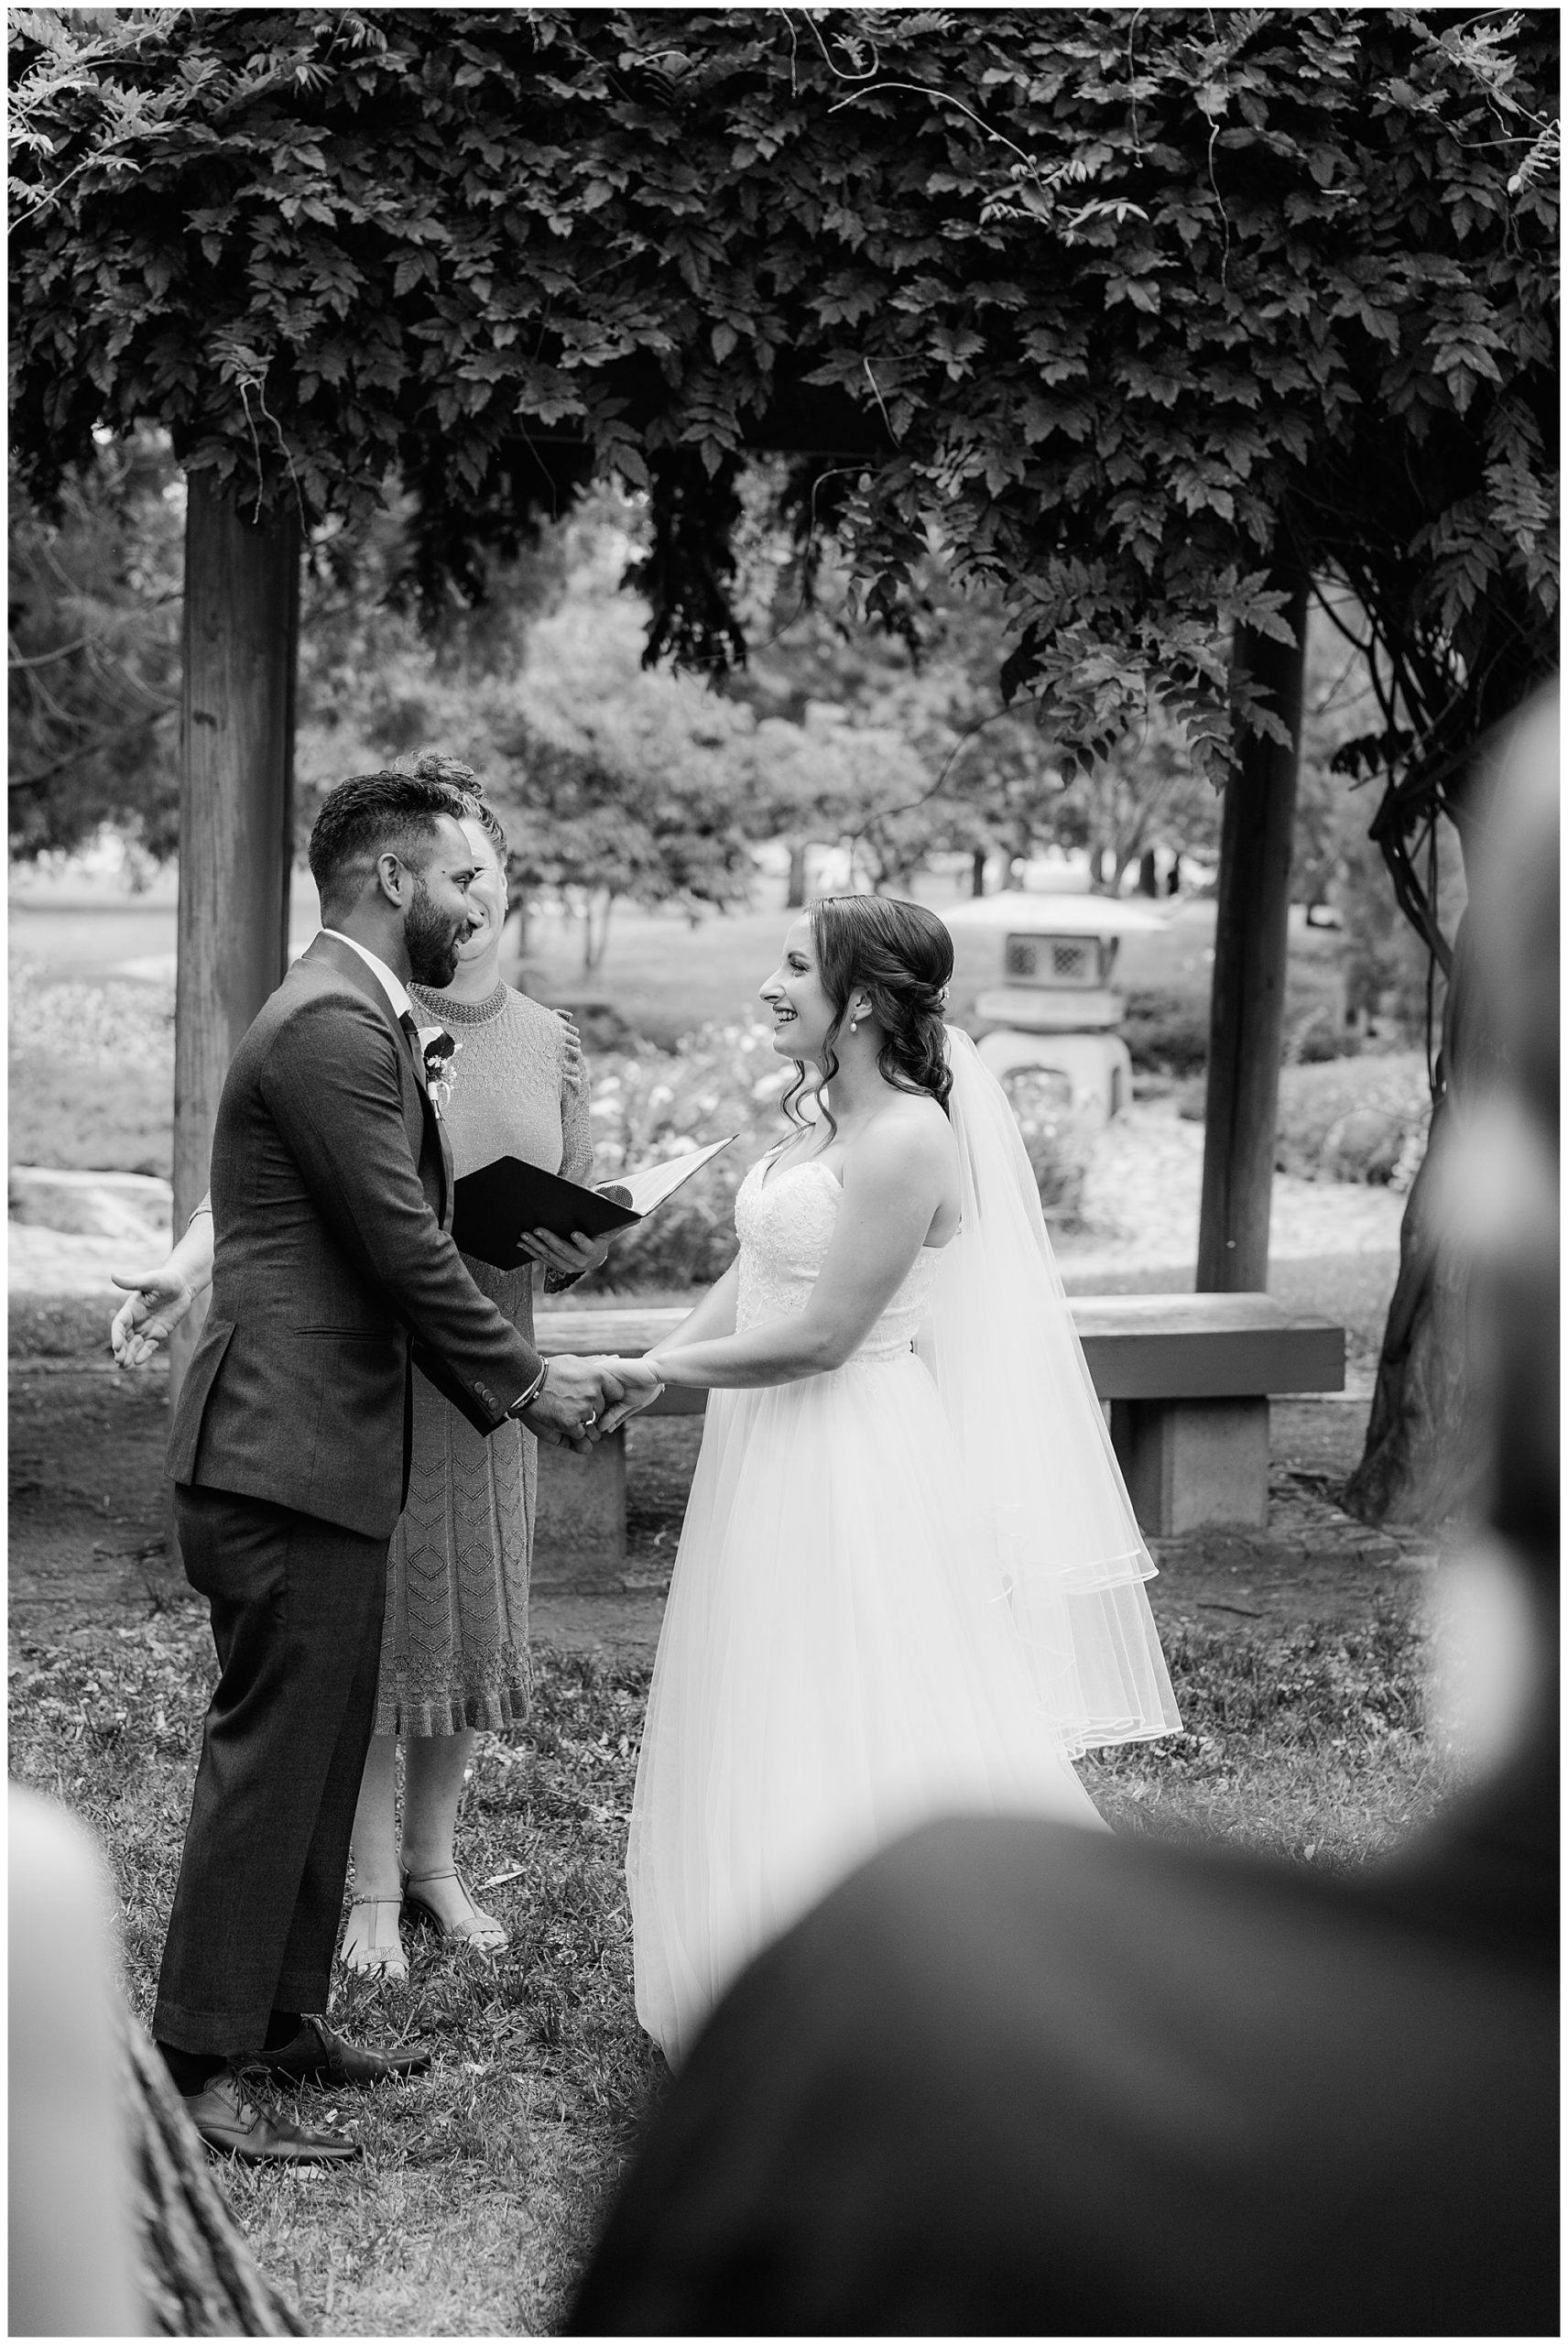 Bride and groom exchanging vows at their Lennox Gardens Elopement